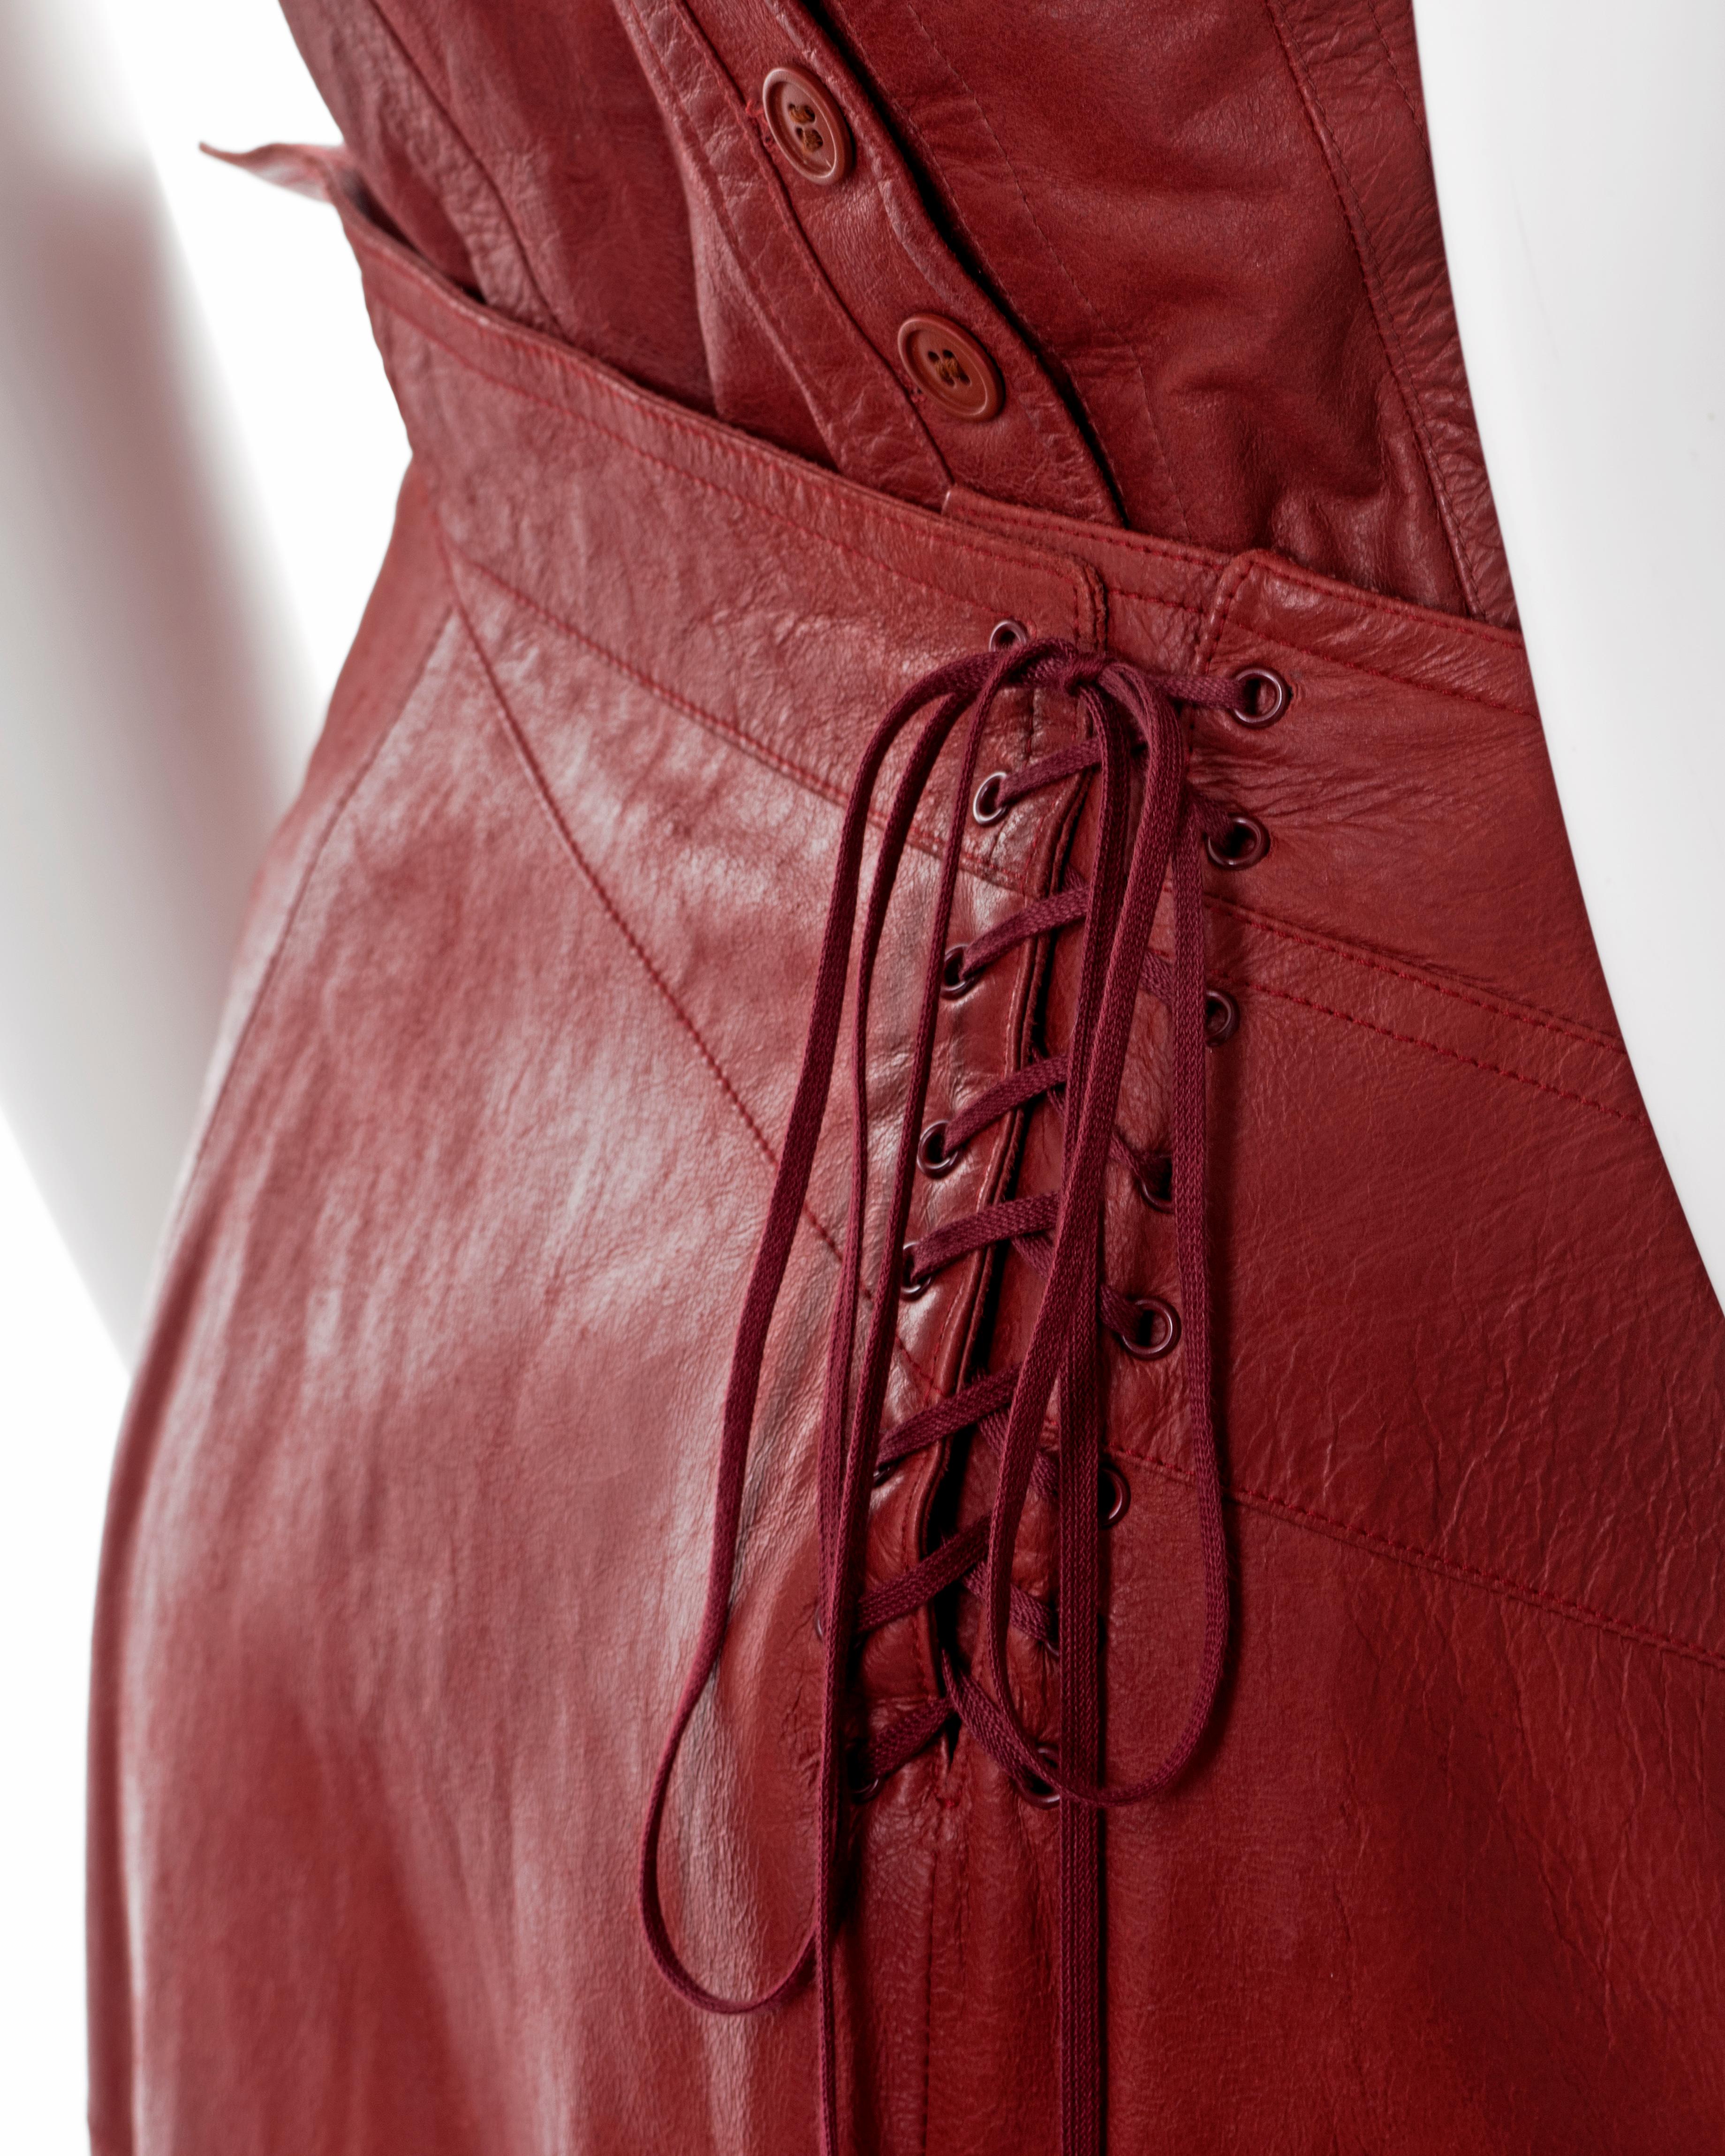 Christian Dior by John Galliano red lambskin leather corset and skirt, ss 2000 8